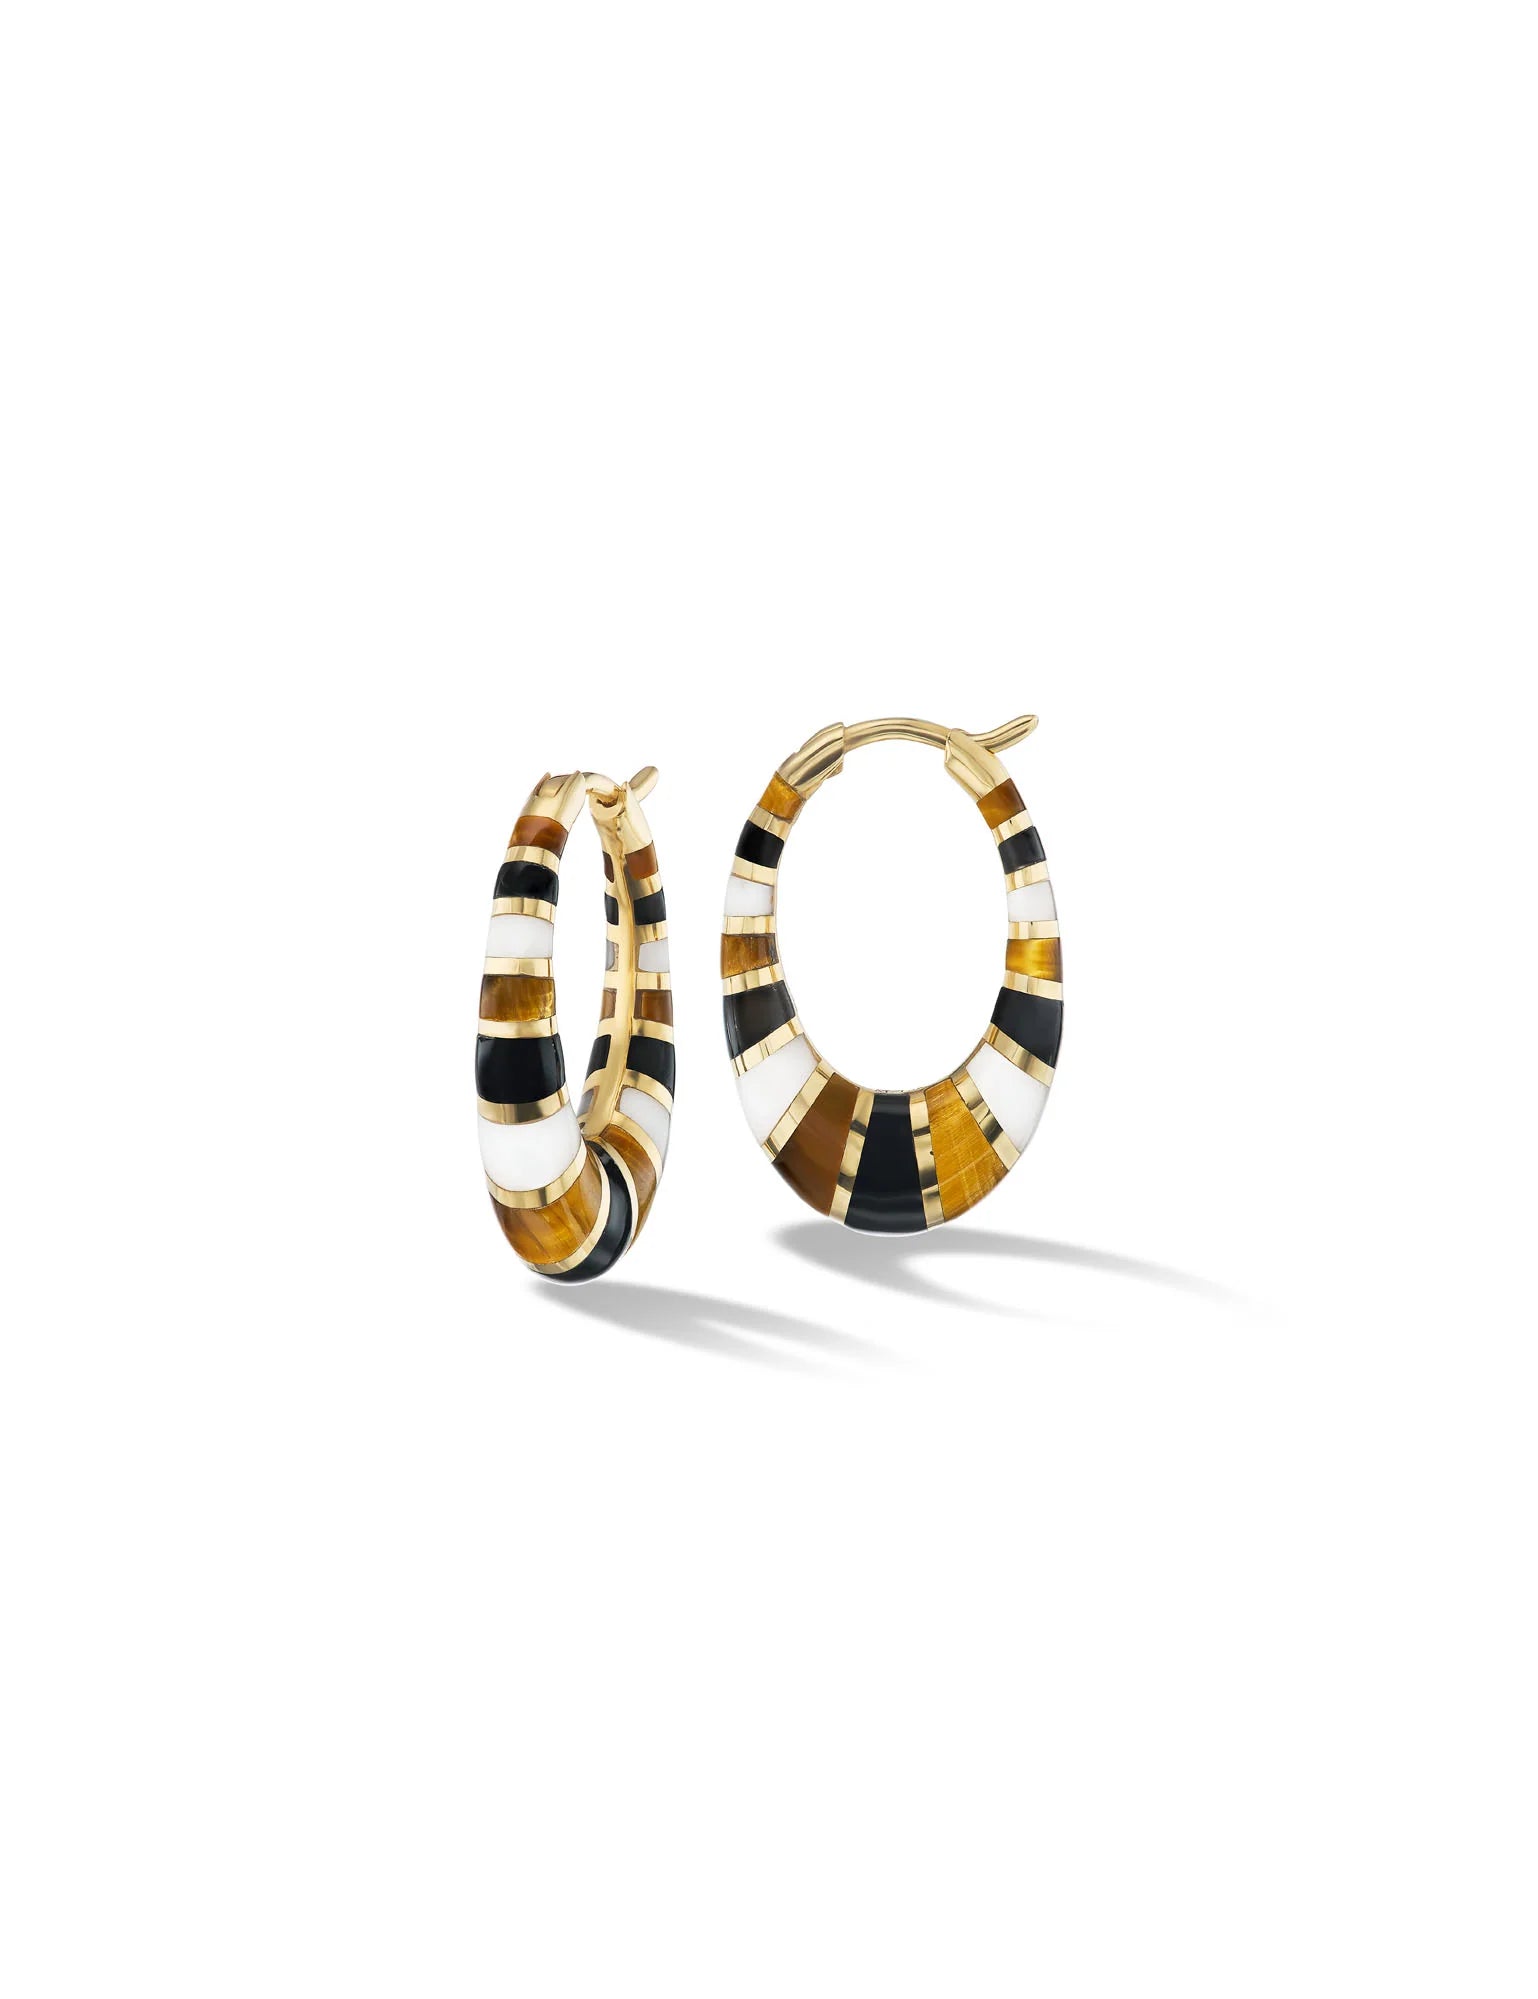 Orly Marcel Mini Inlay Hoops with Black and White Onyx and Tiger's Eye - Be On Park